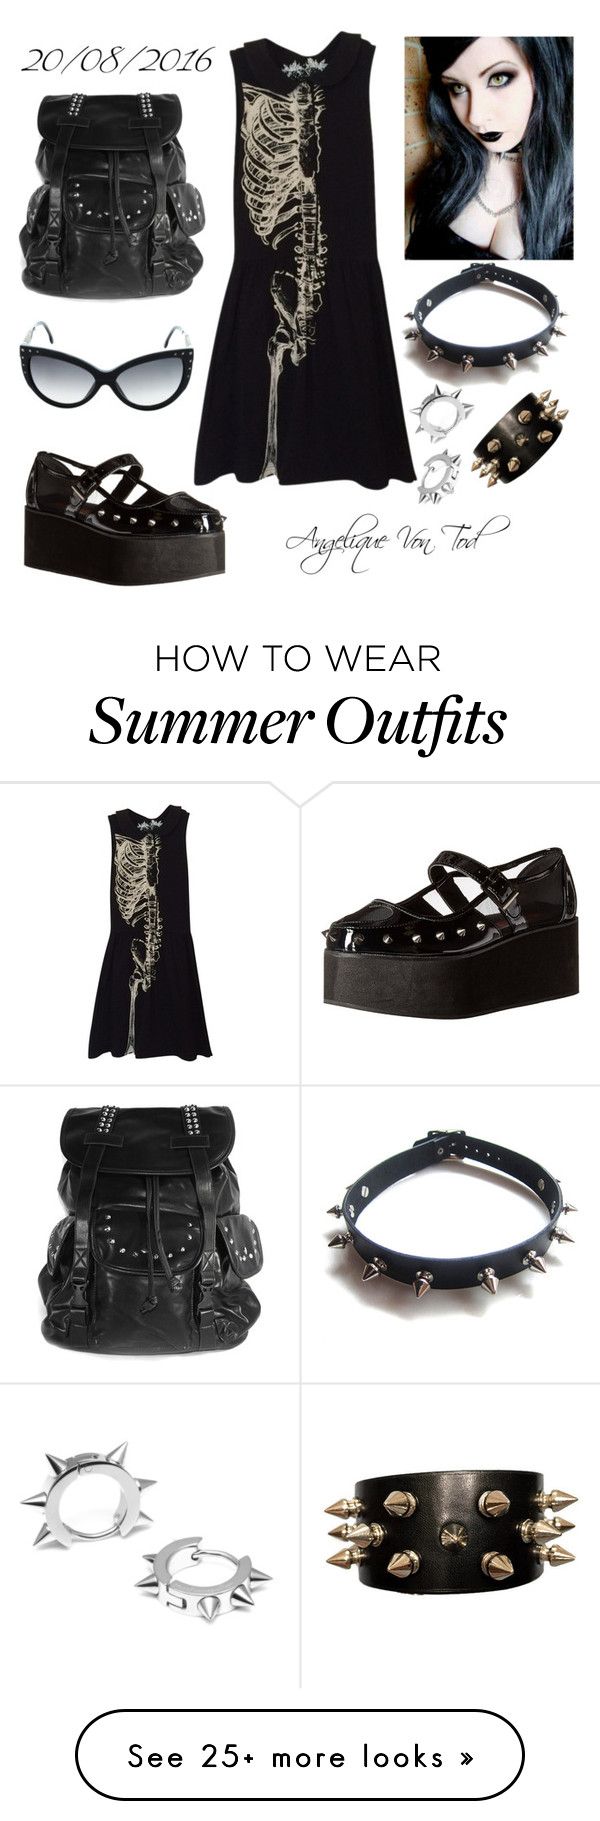 "Gothic Summer Outfit" by angelique-von-tod on Polyvore featuring Mari...